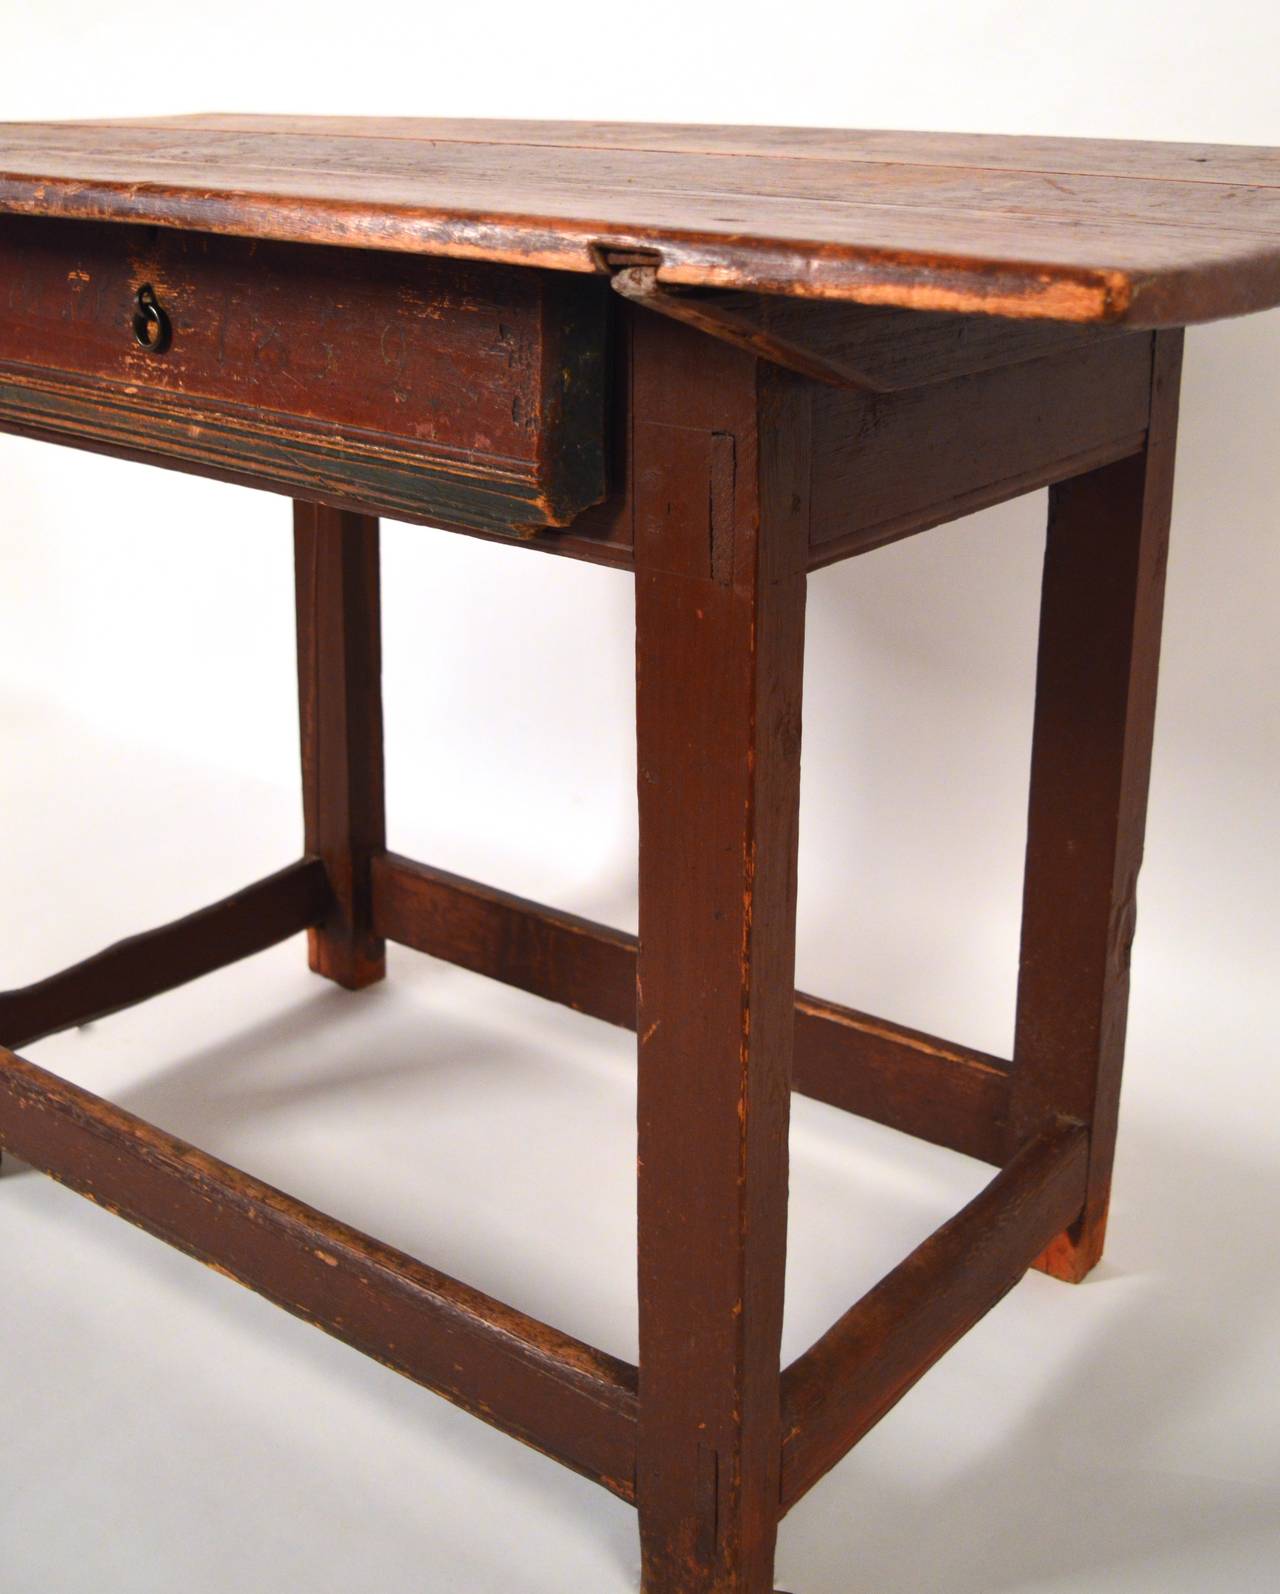 19th Century Swedish One-Drawer Table Retaining the Original Paint and Hardware For Sale 4